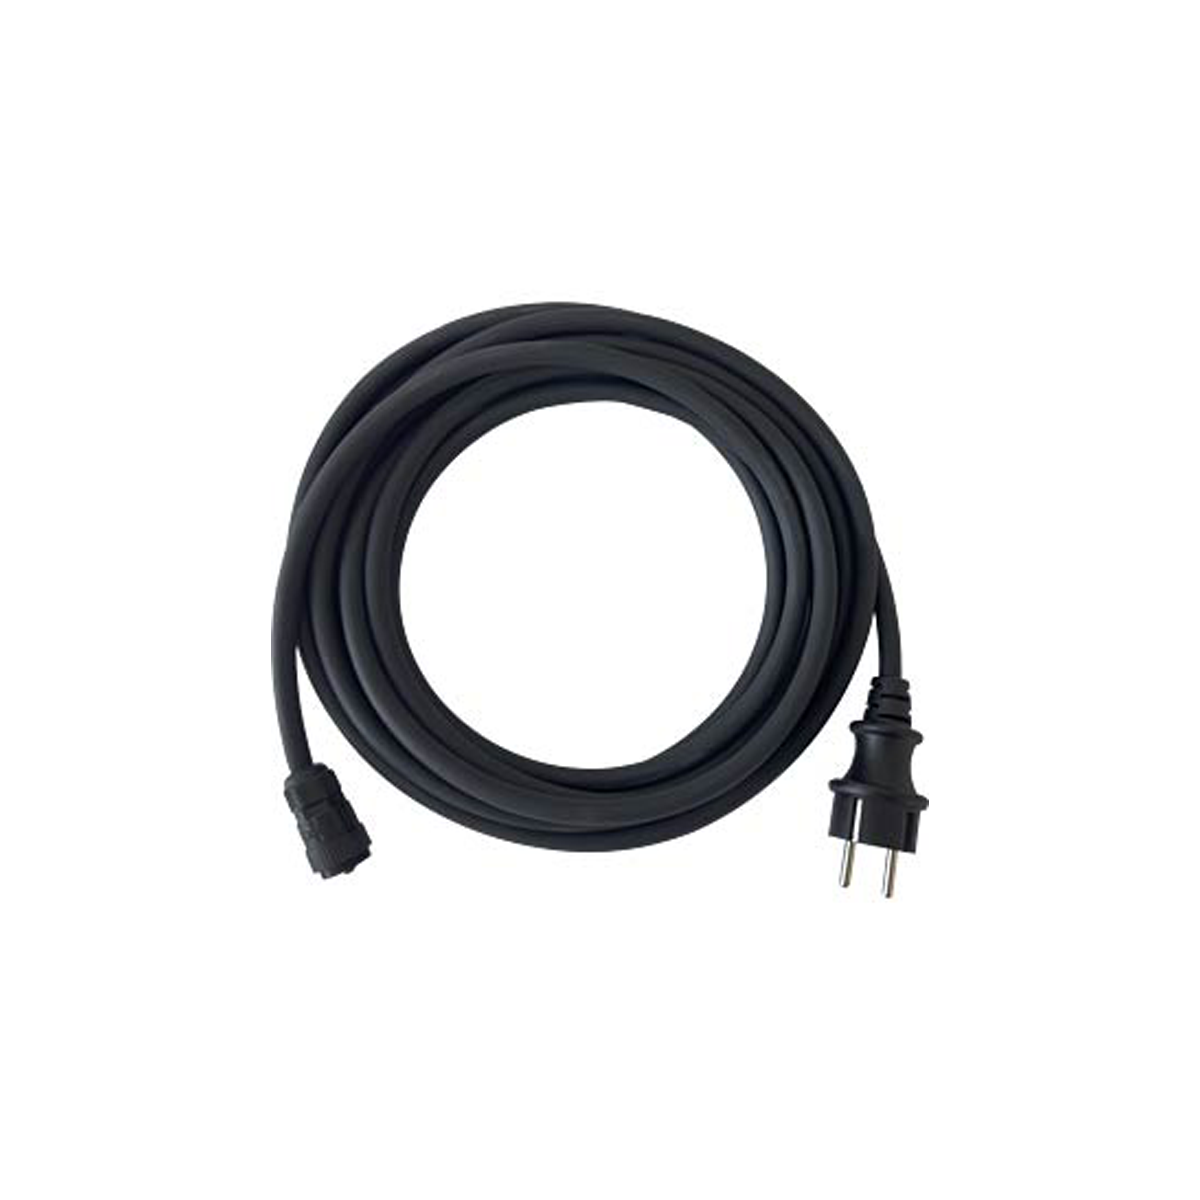 APSystems Schuko cable 5m for EZ1-M